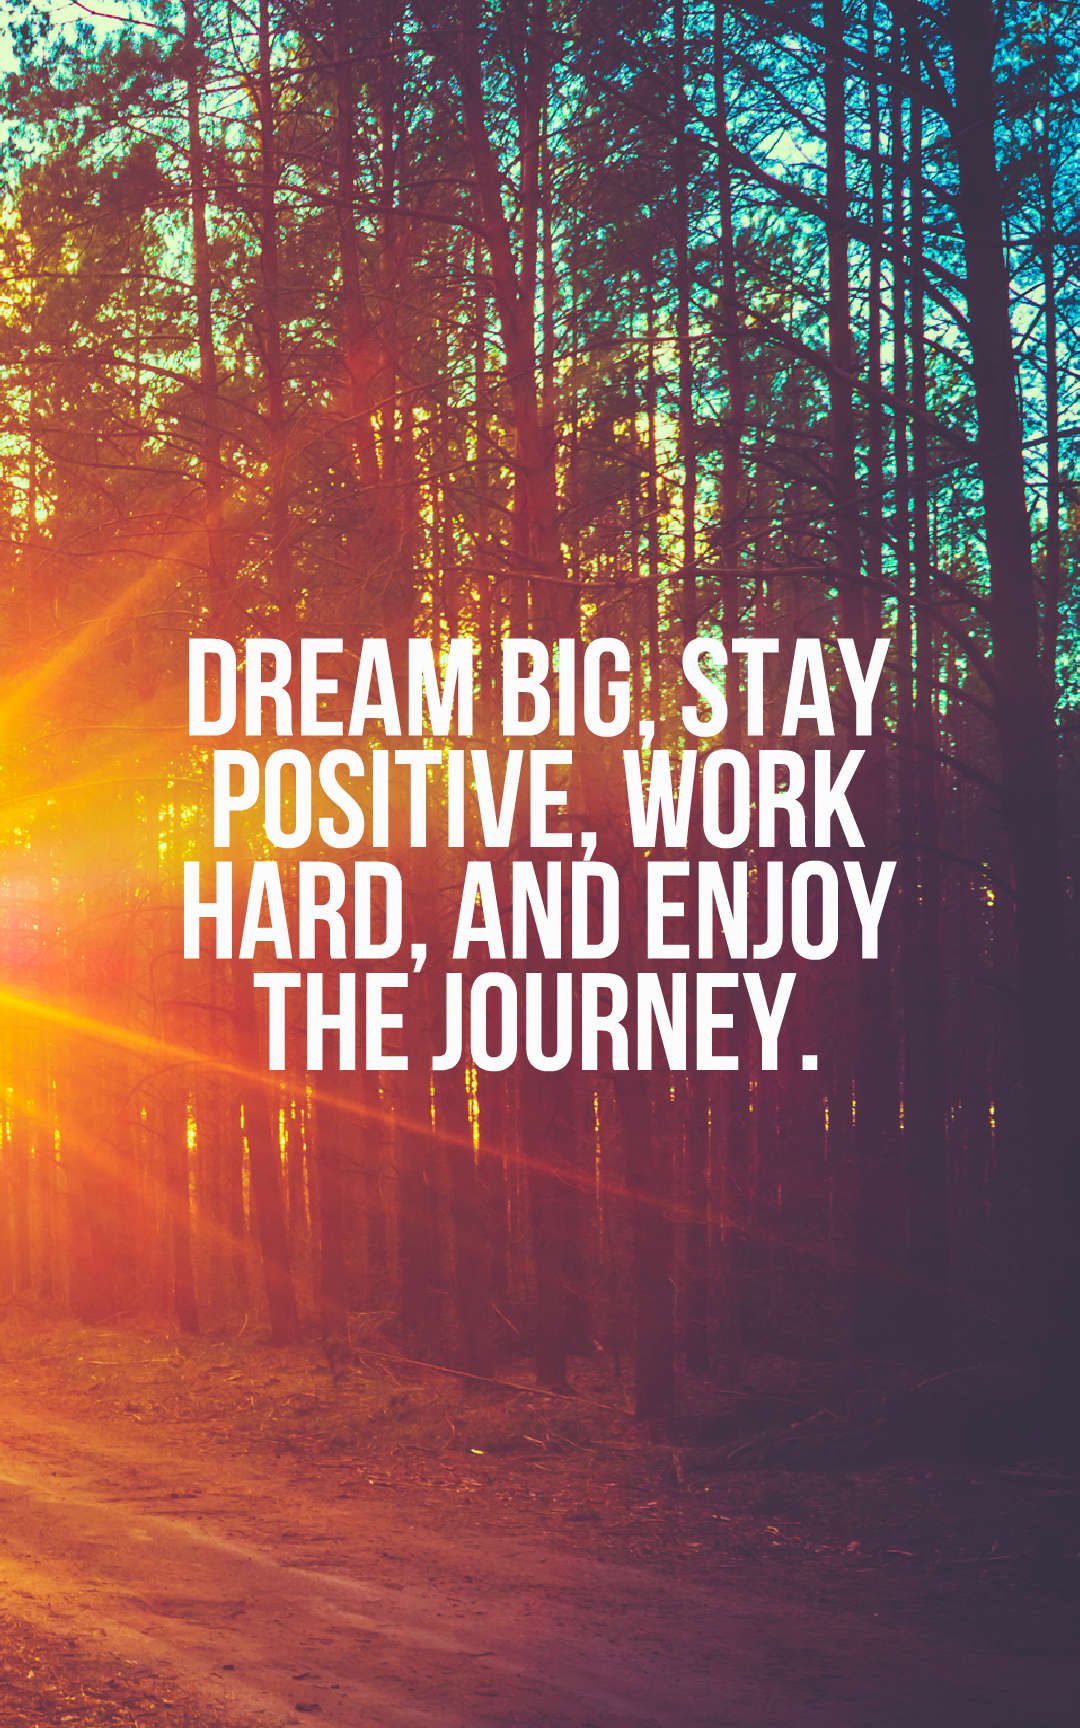 Dream big, stay positive, work hard, and enjoy the journey.